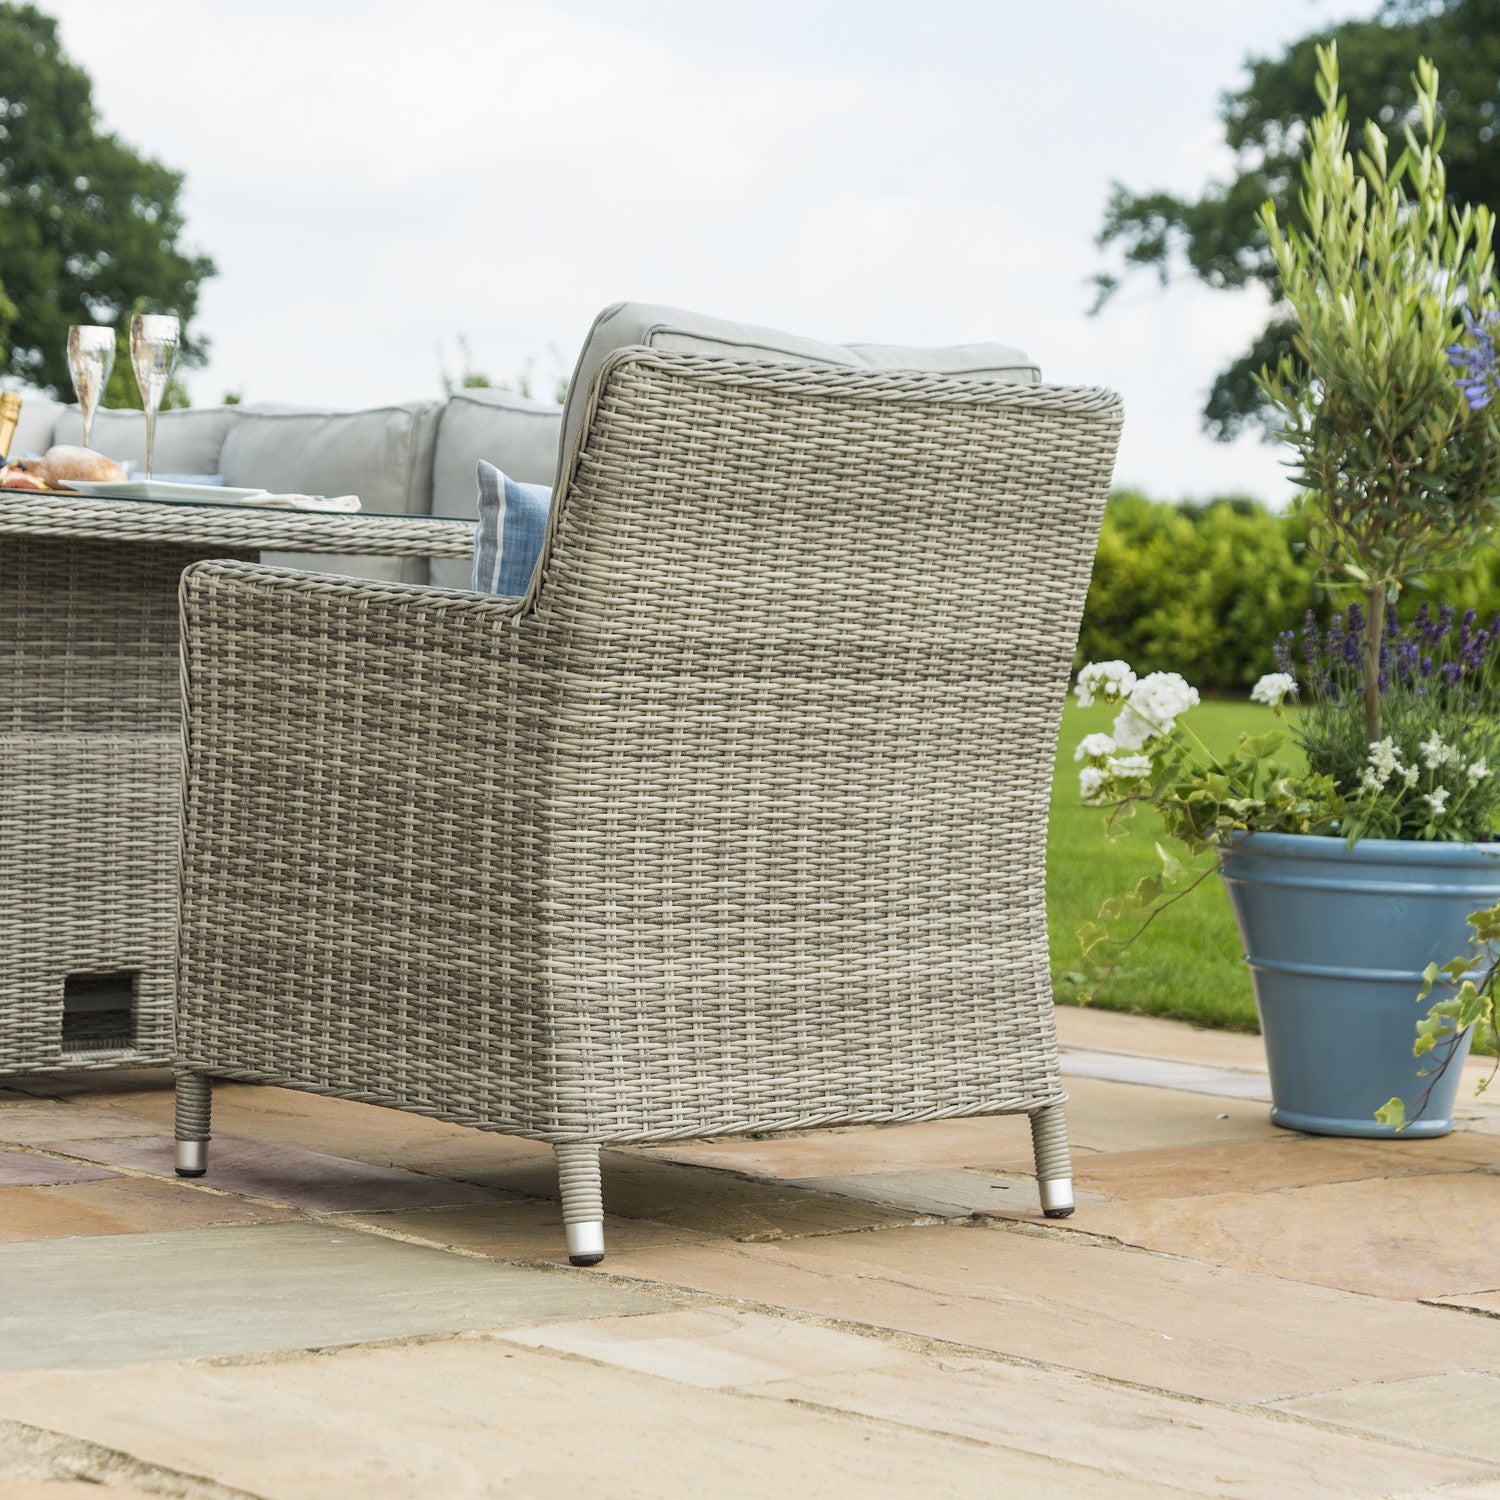 Oxford Rattan Corner Dining Sofa Set with Ice Bucket, Rising Table and Armchair